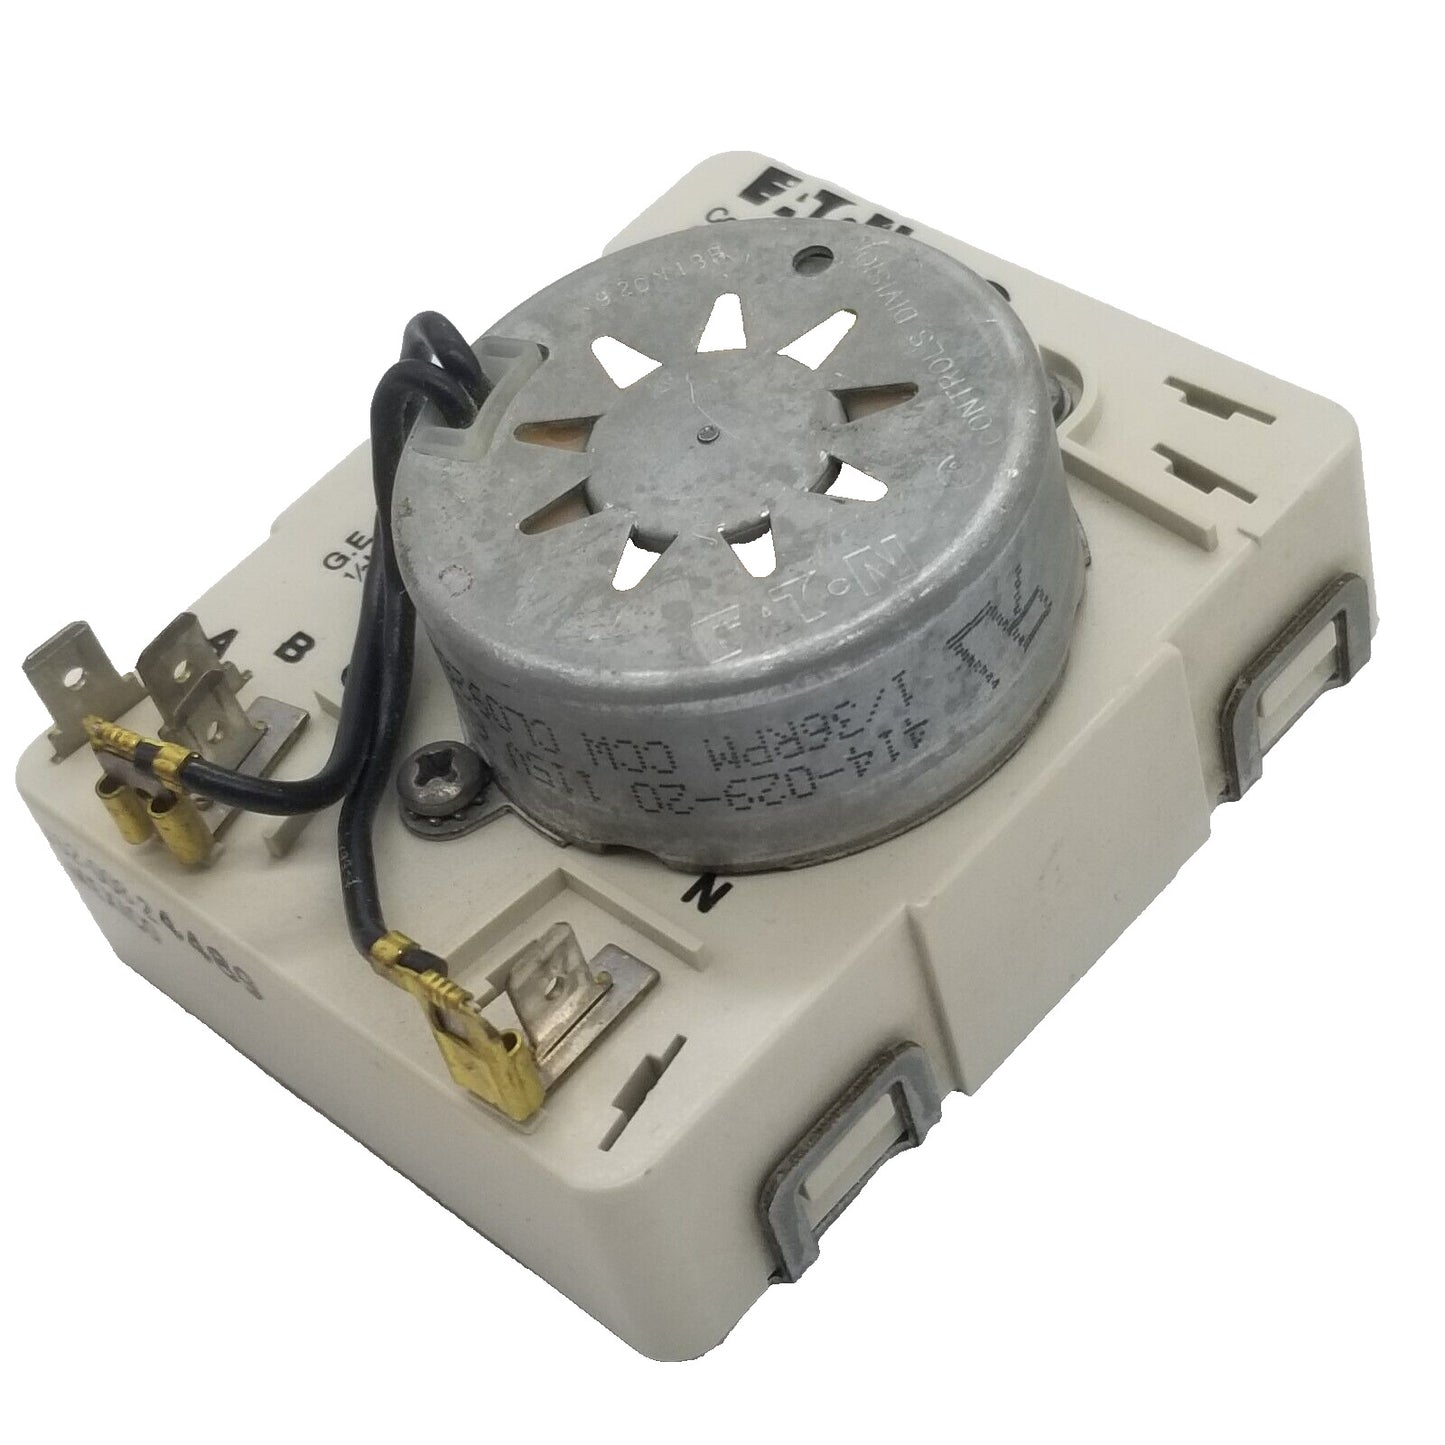 Genuine OEM Replacement for GE Dryer Timer 113D5510G008